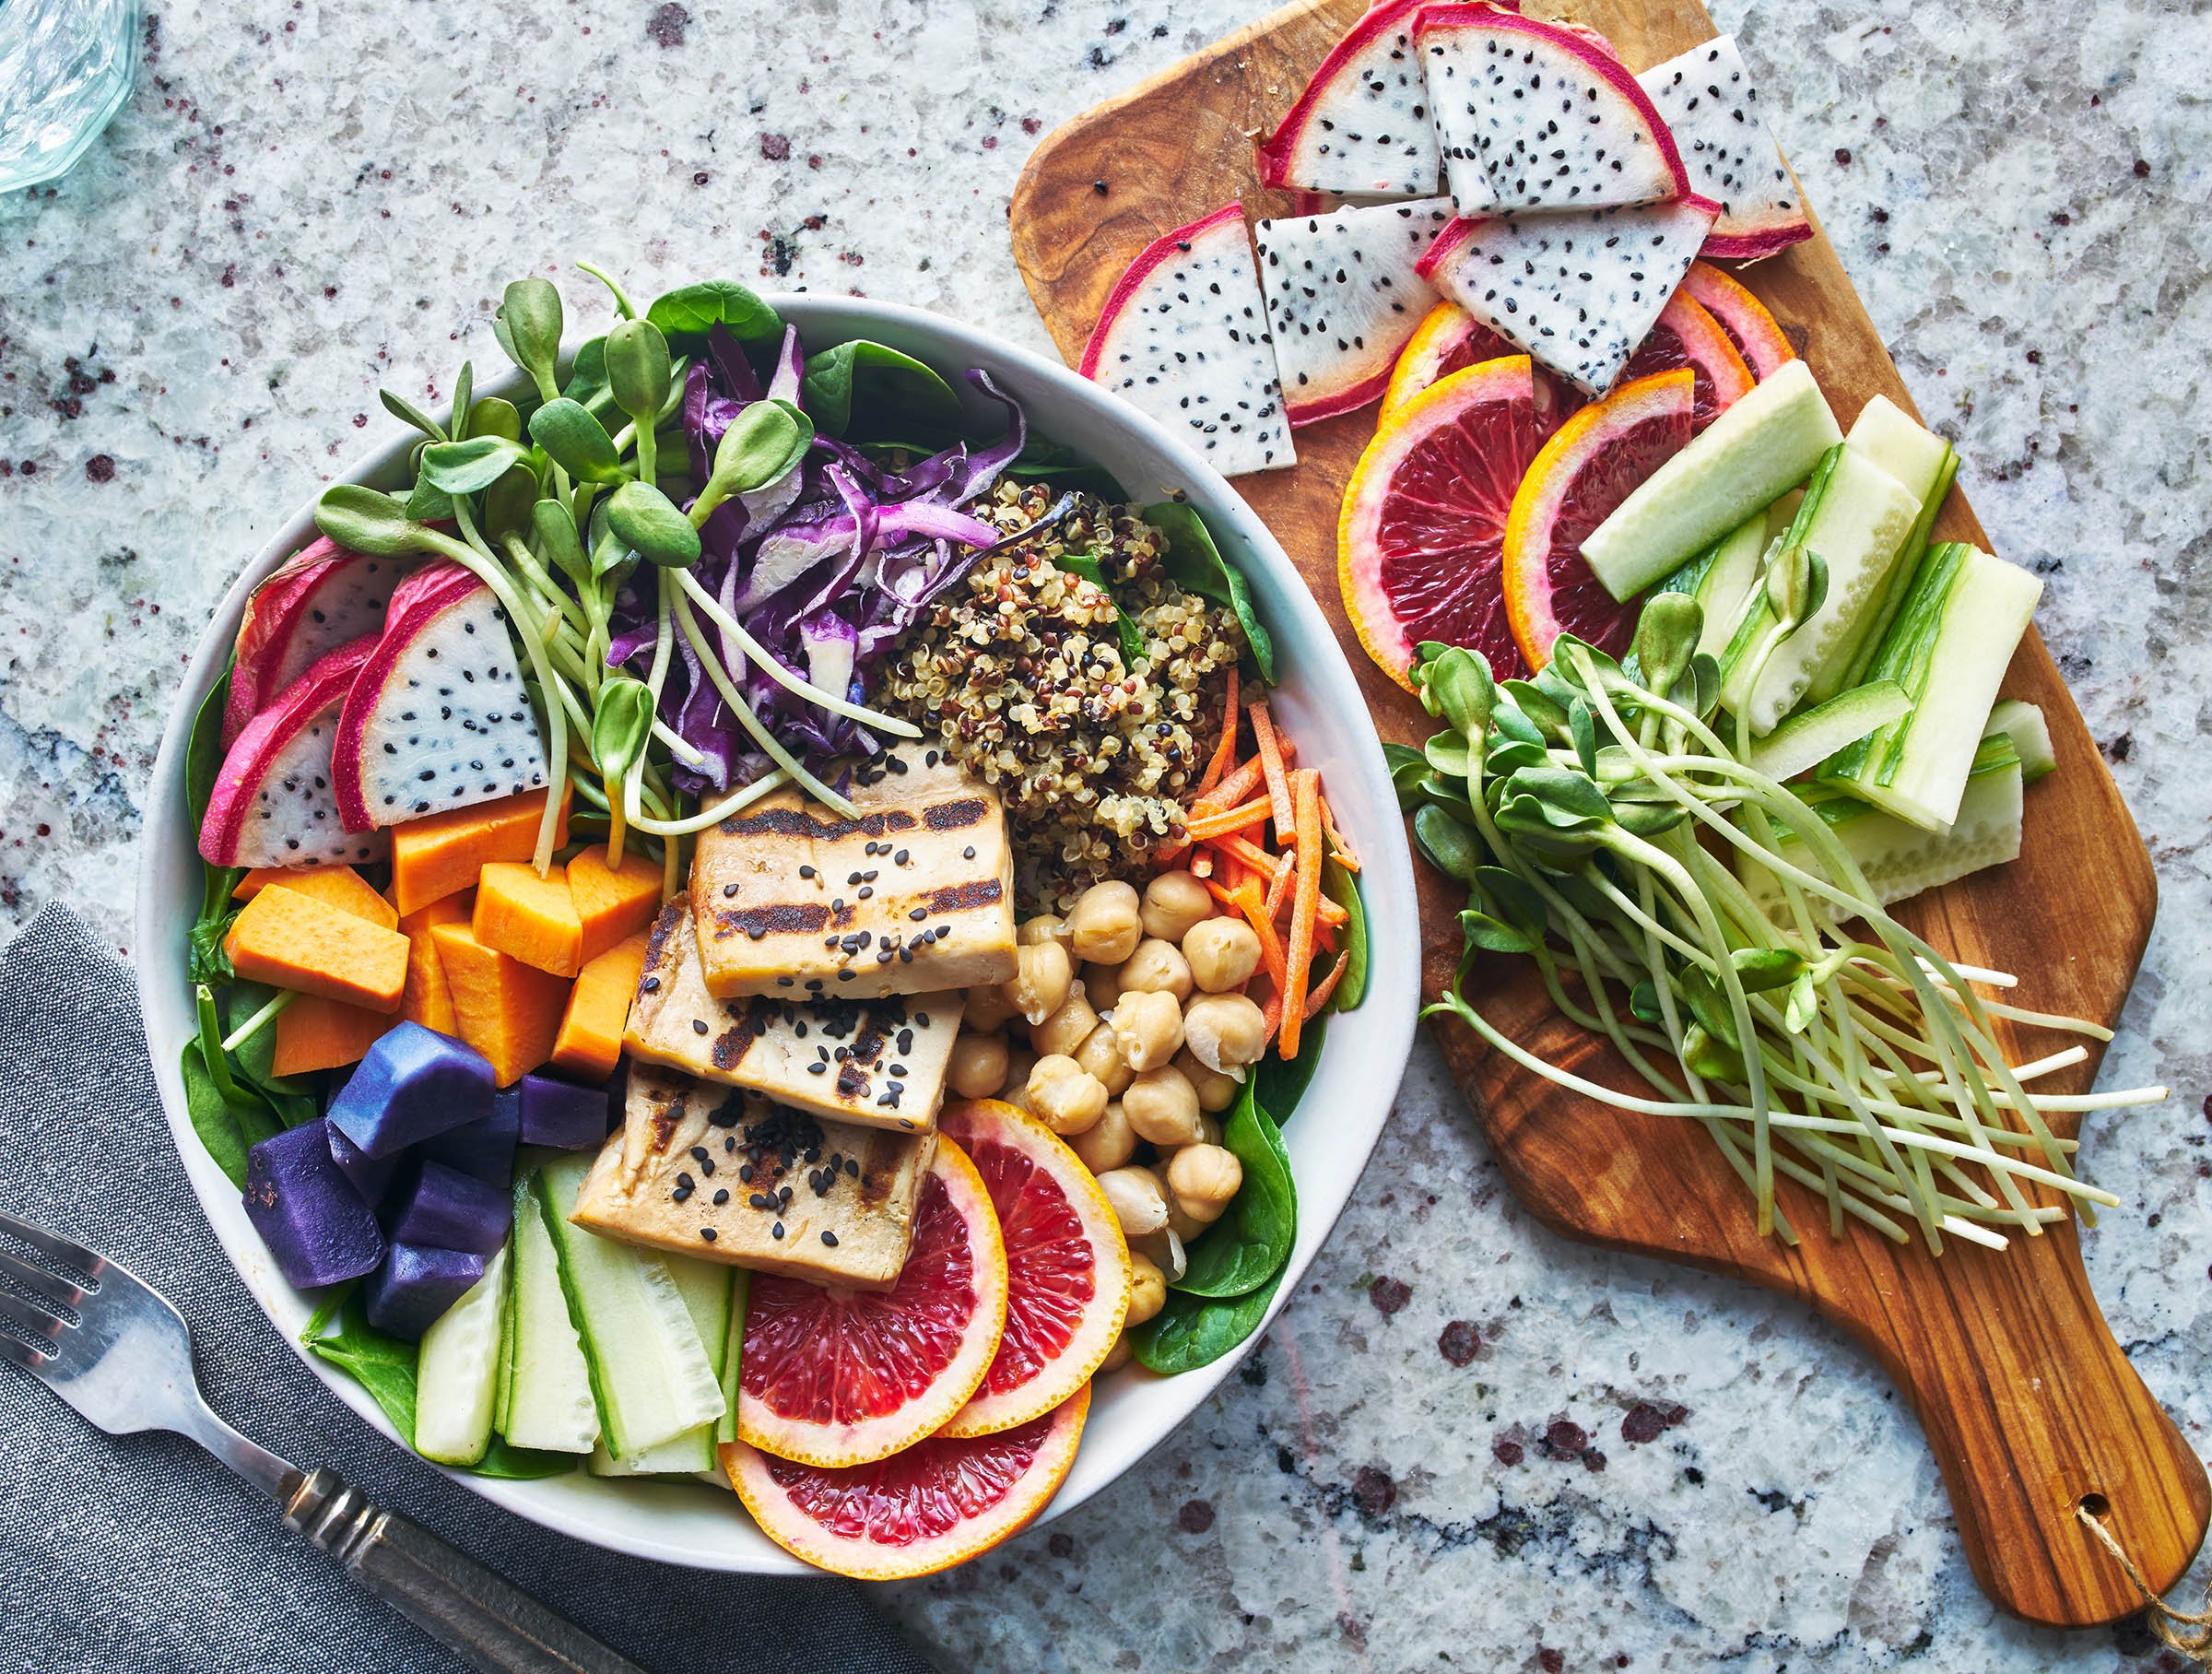 A colorful plant-based meal with fruit, vegetables and protein